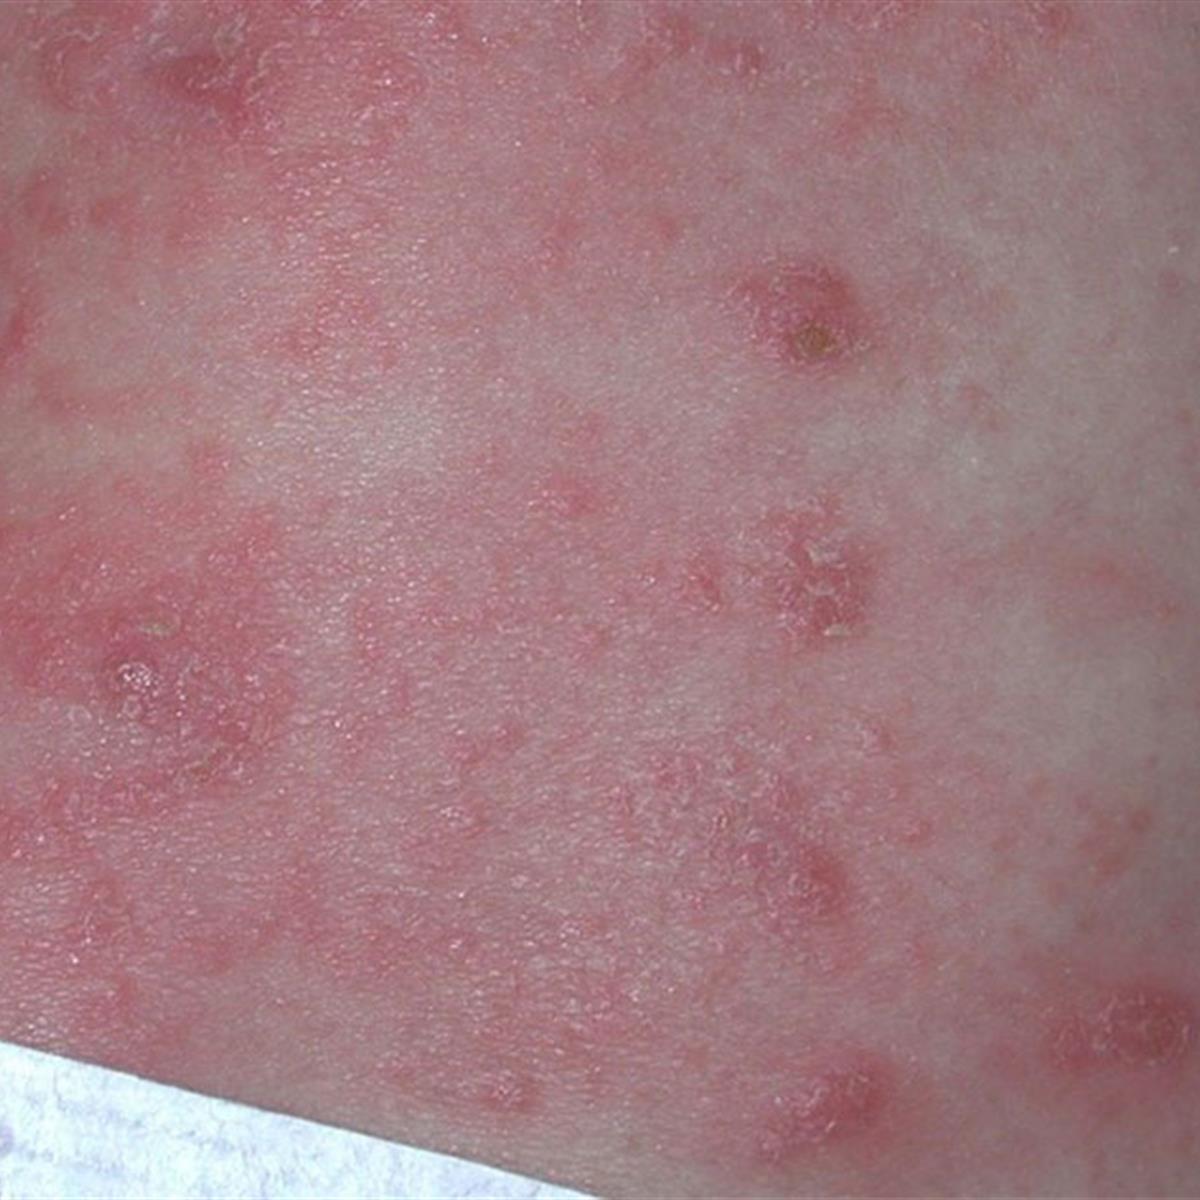 scabies rash on stomach